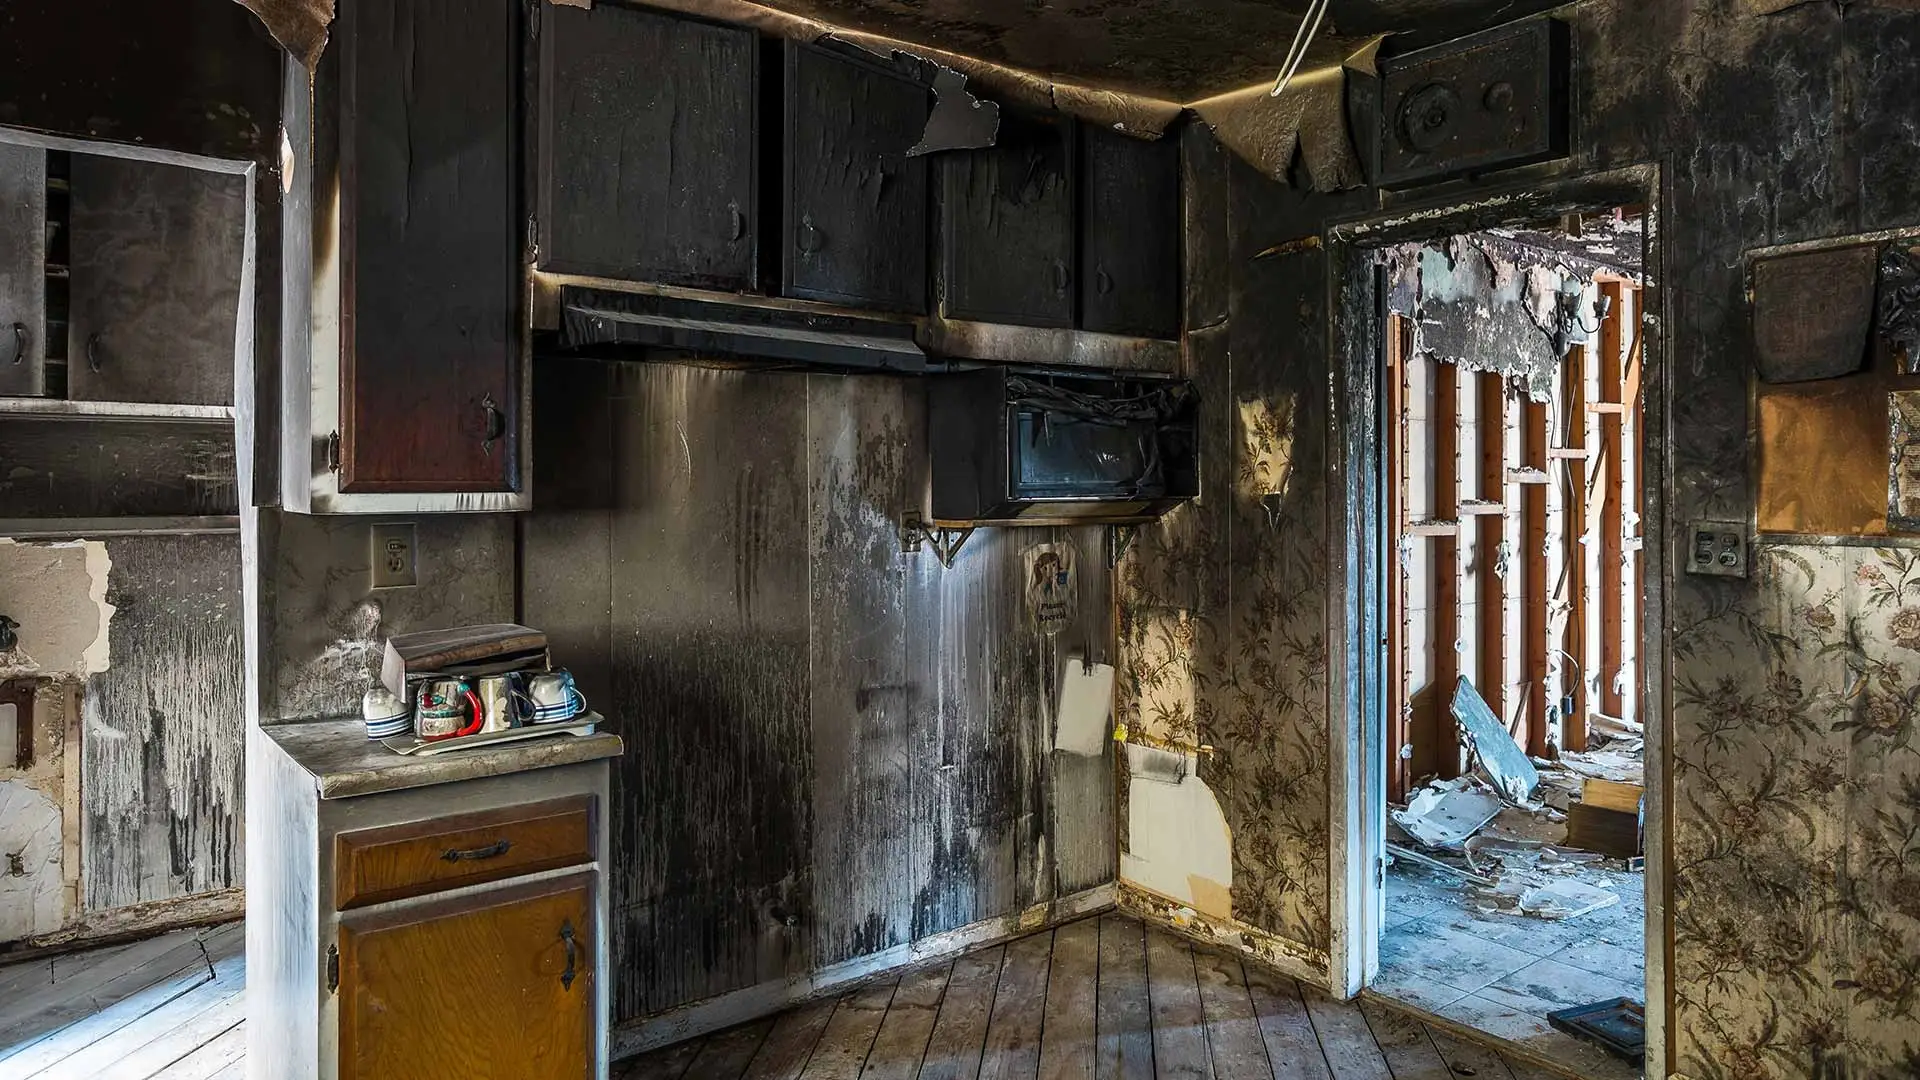 5 Most Common Causes of Kitchen Fires